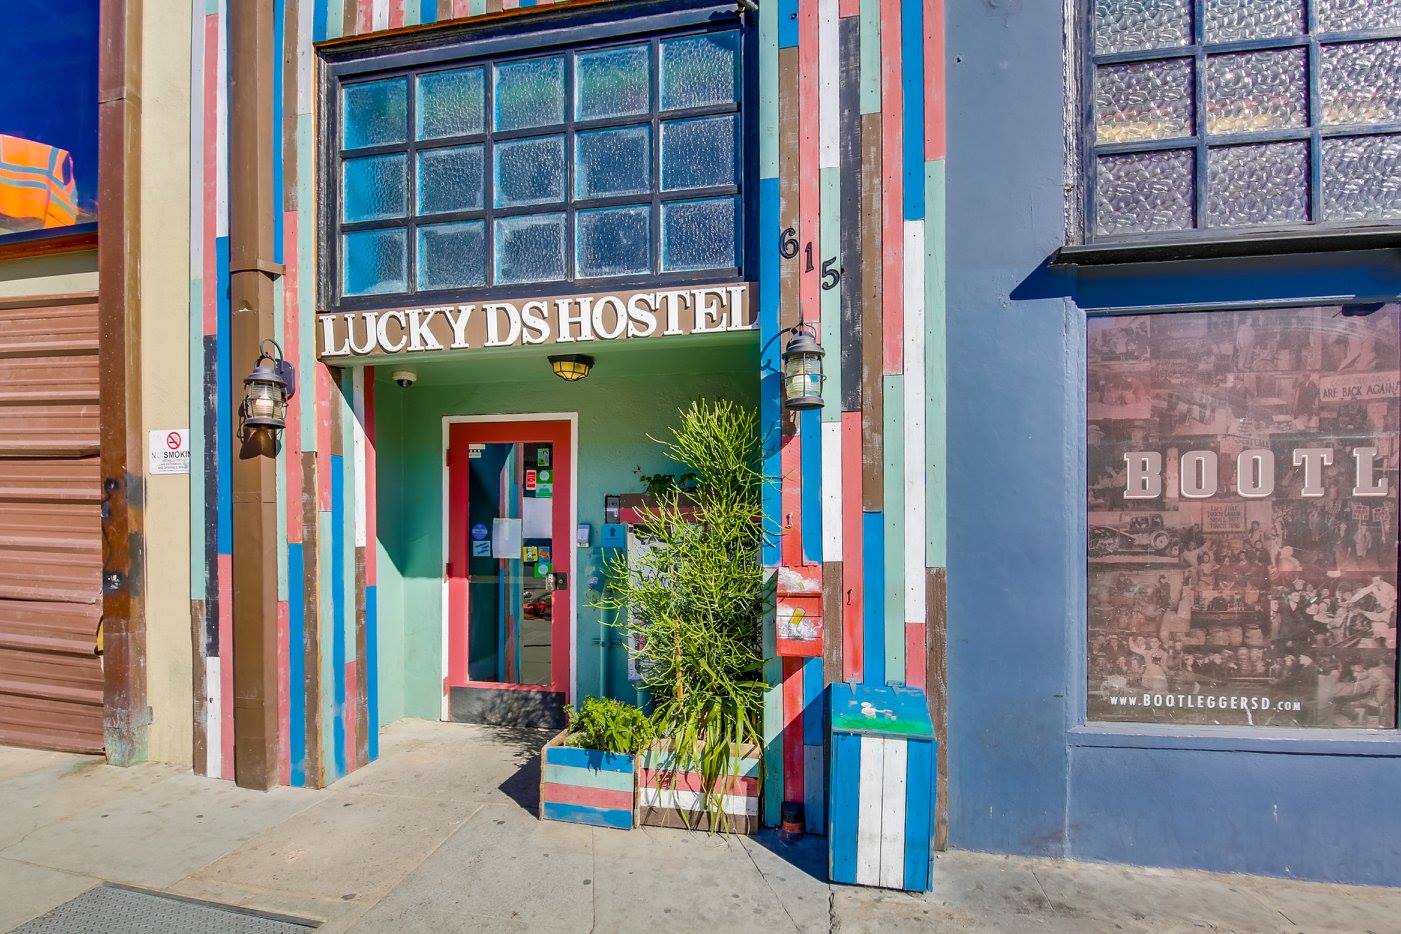 Entrance to the Lucky D's Hostel in San Diego